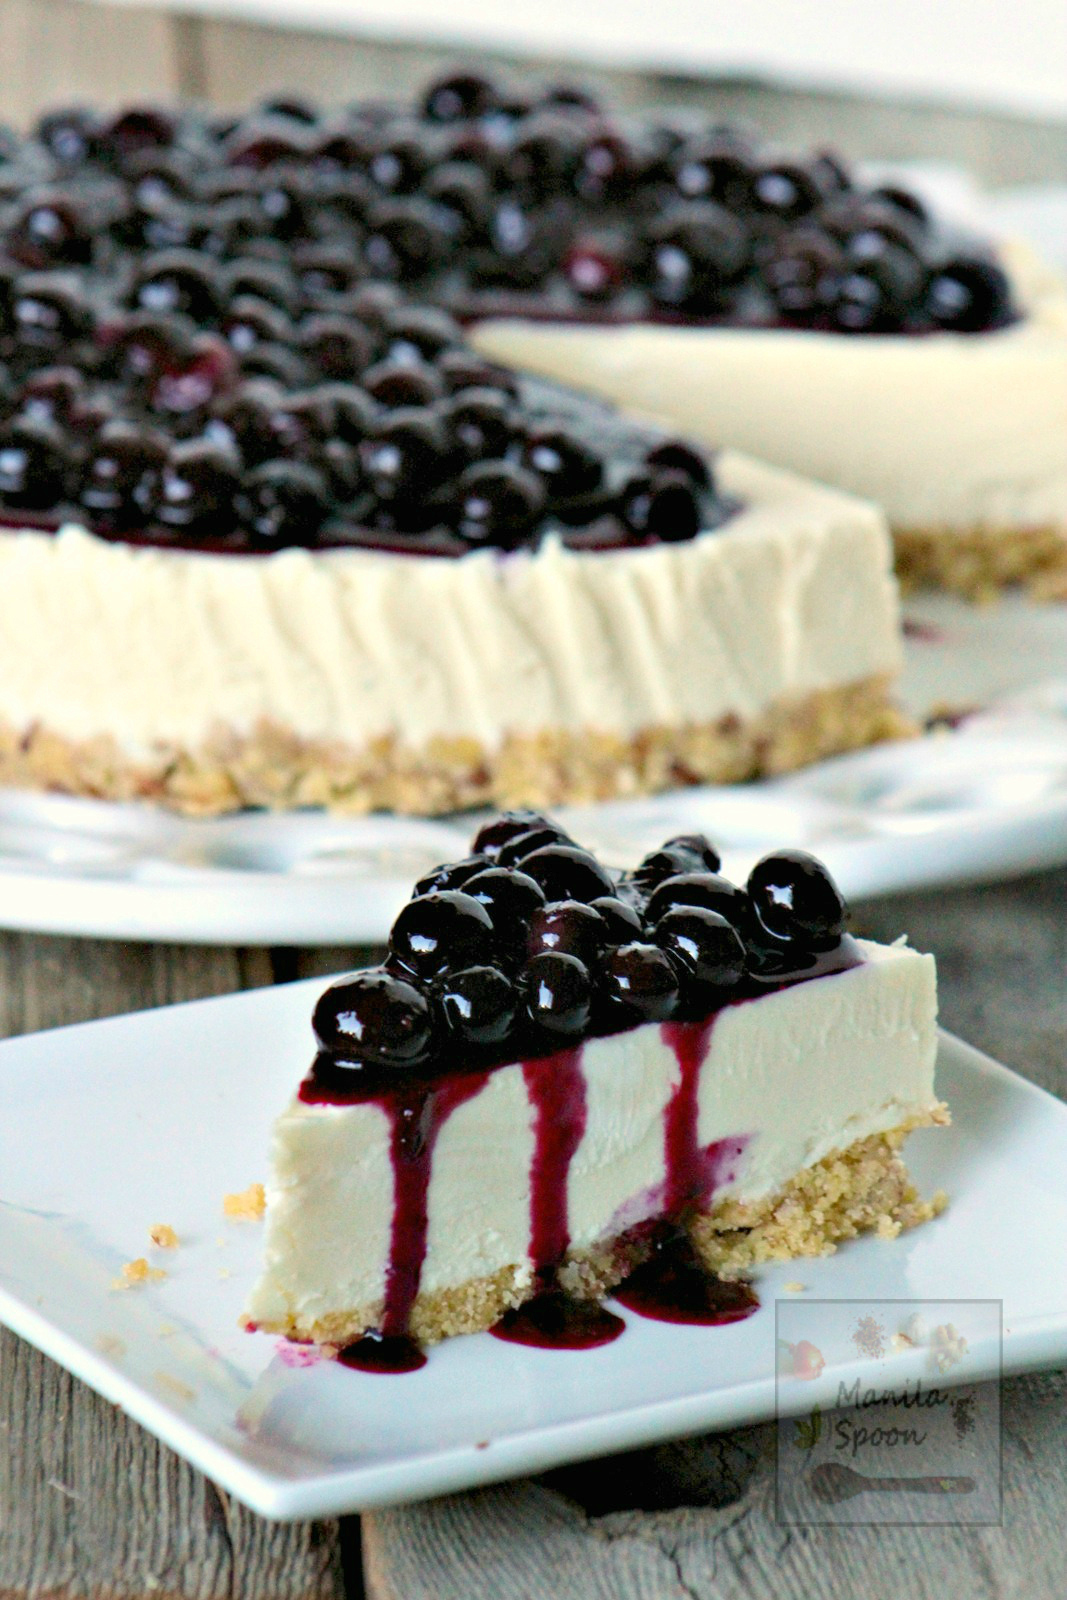 The answer to all your chocolate cravings! Just 30 minutes to make and best of all no baking involved. No Bake White Chocolate Blueberry Cheesecake | manilaspoon.com